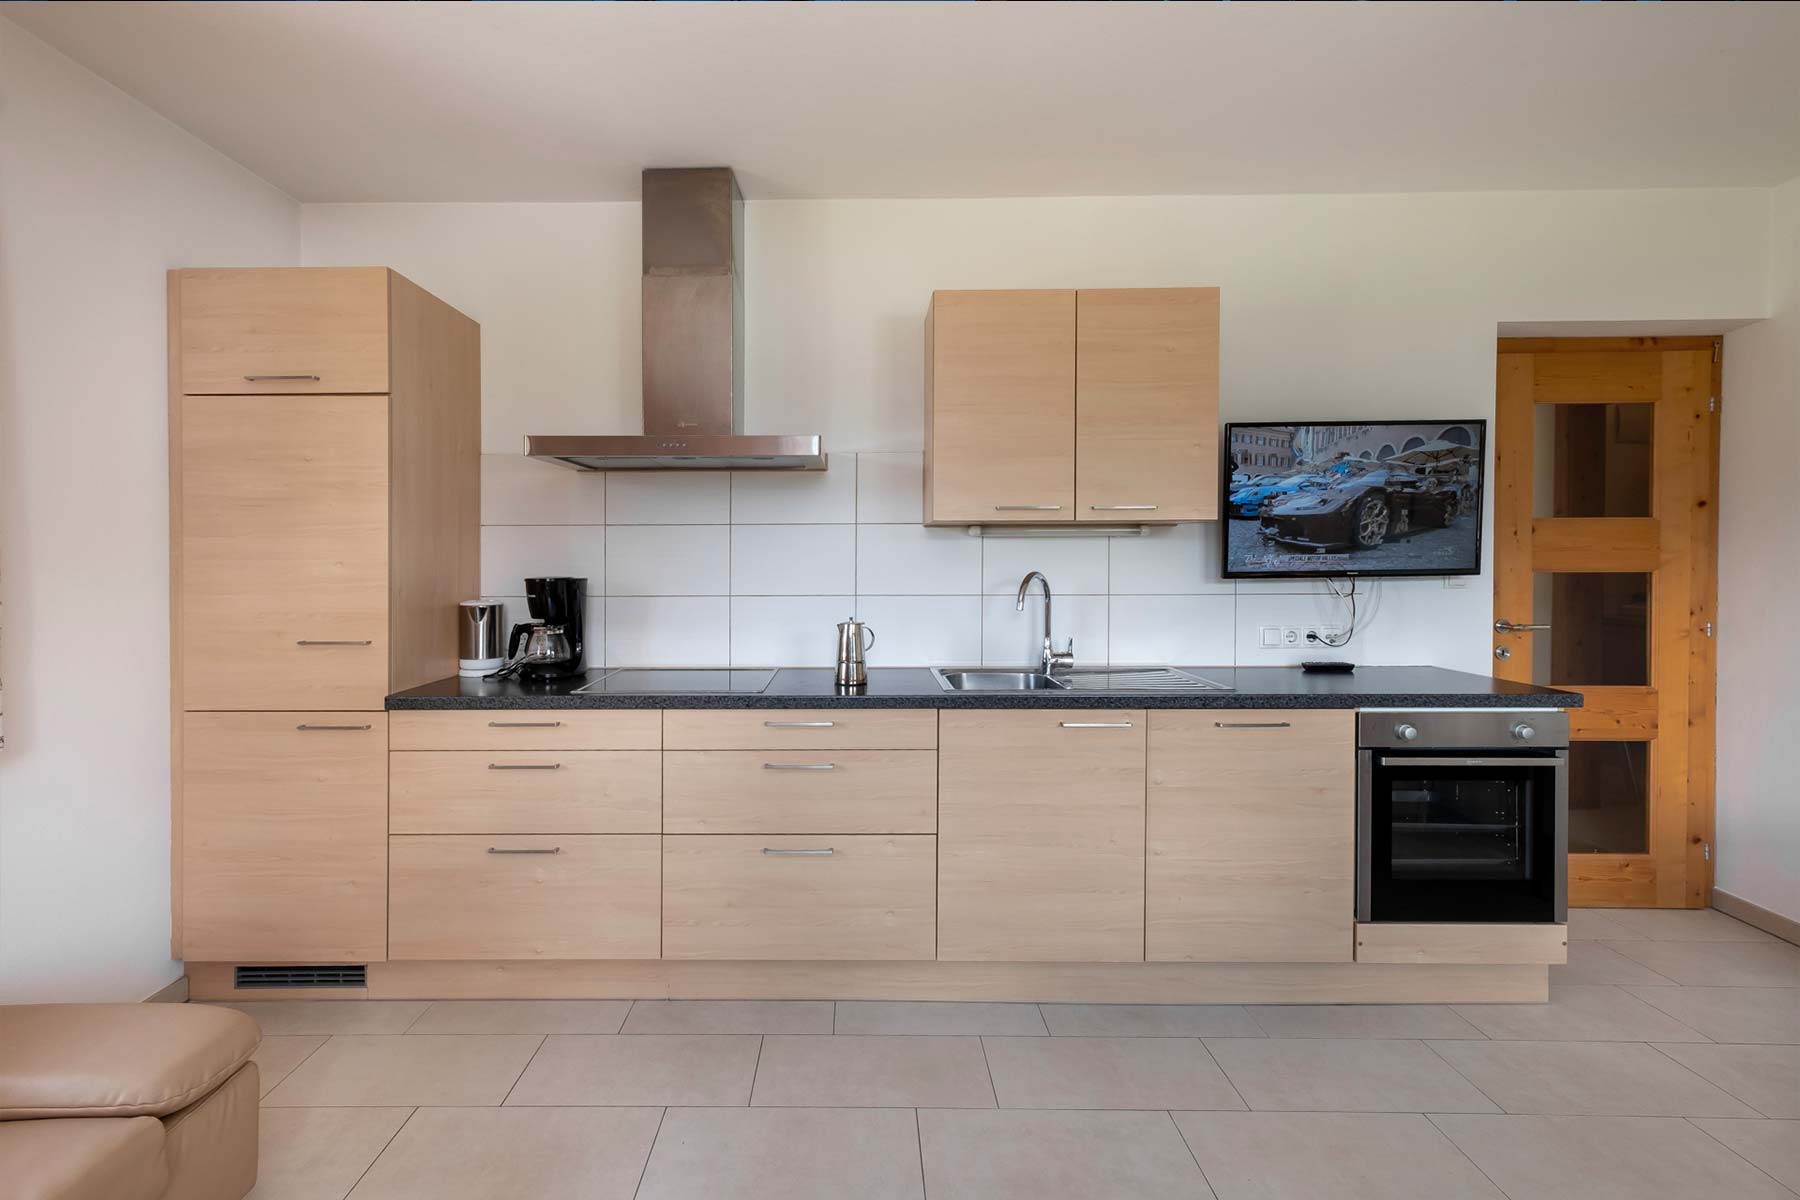  Fully equipped kitchens